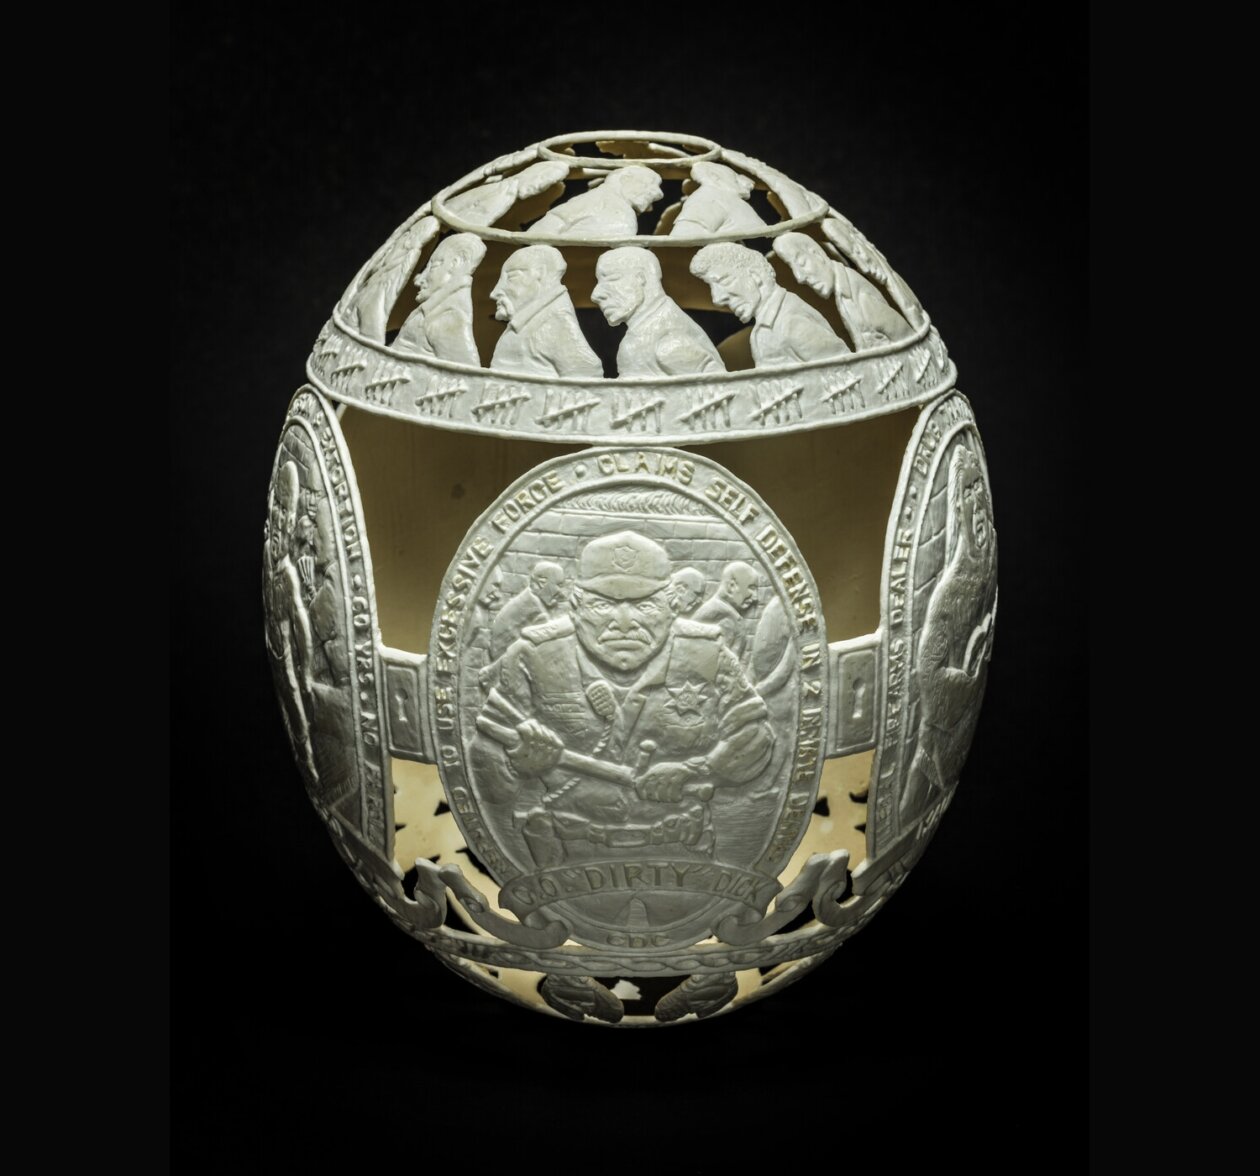 Intricate carvings on ostrich eggs by Gil Batle